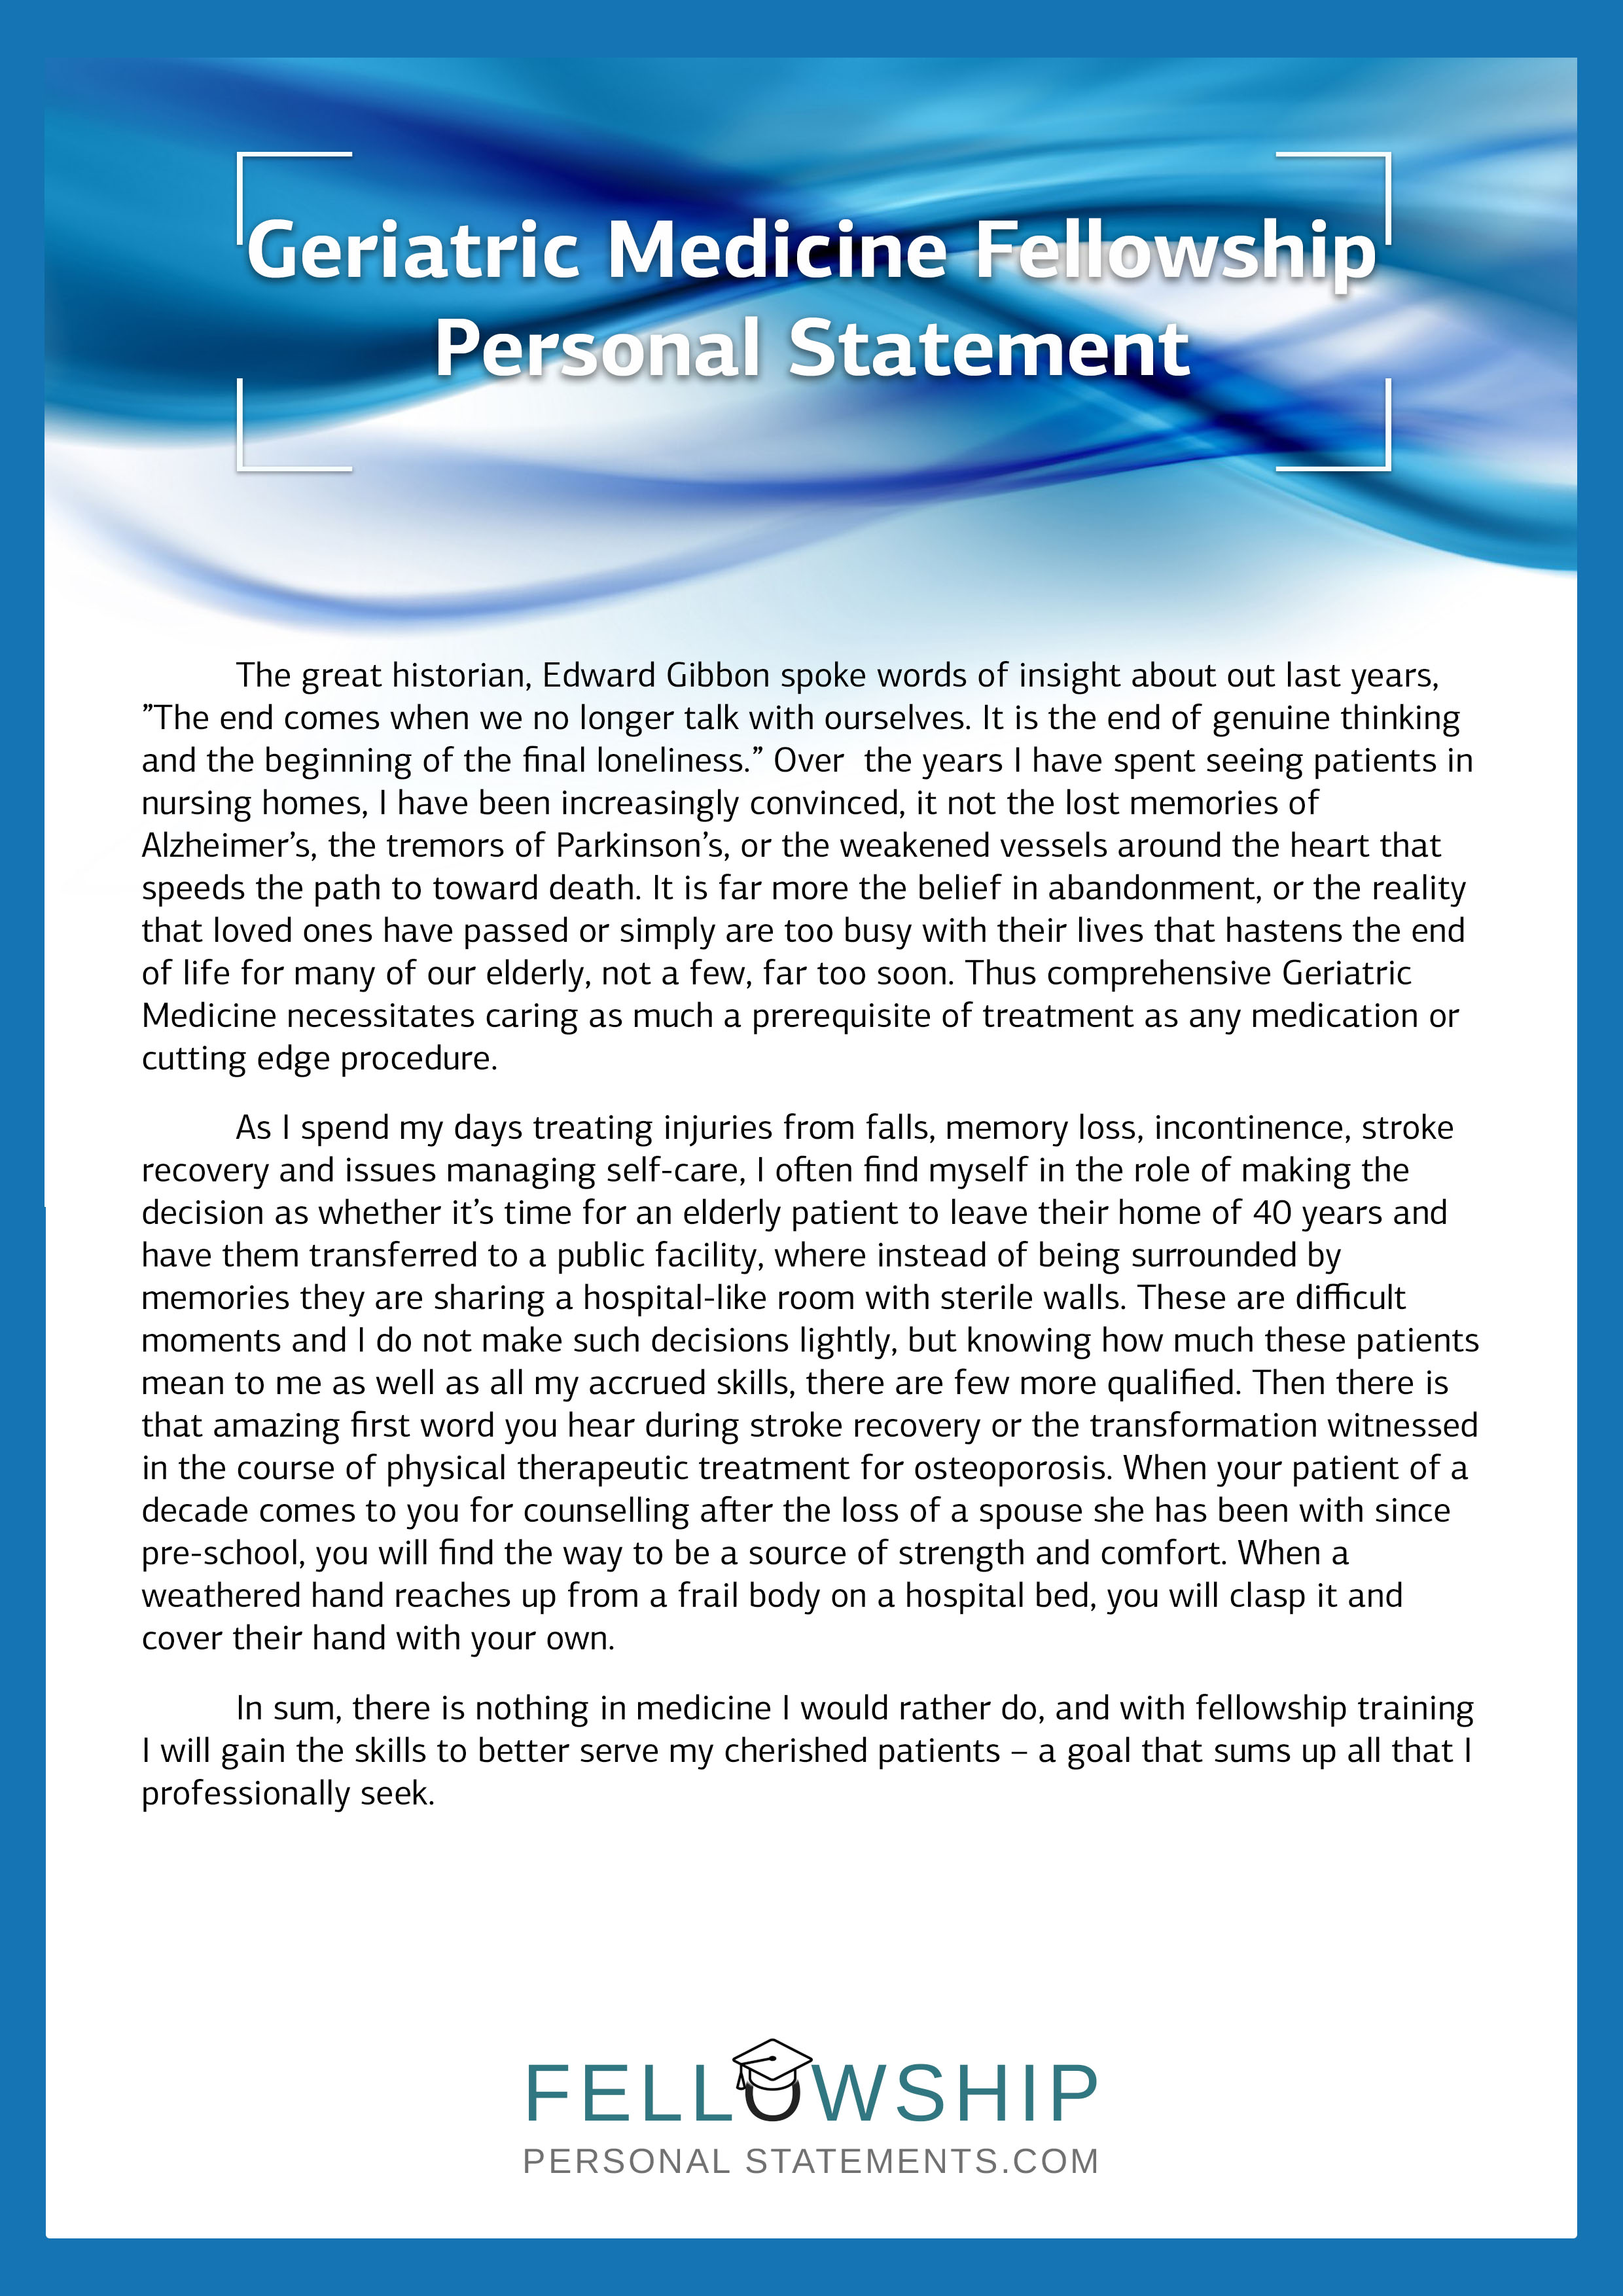 how to write a personal statement for medical fellowship